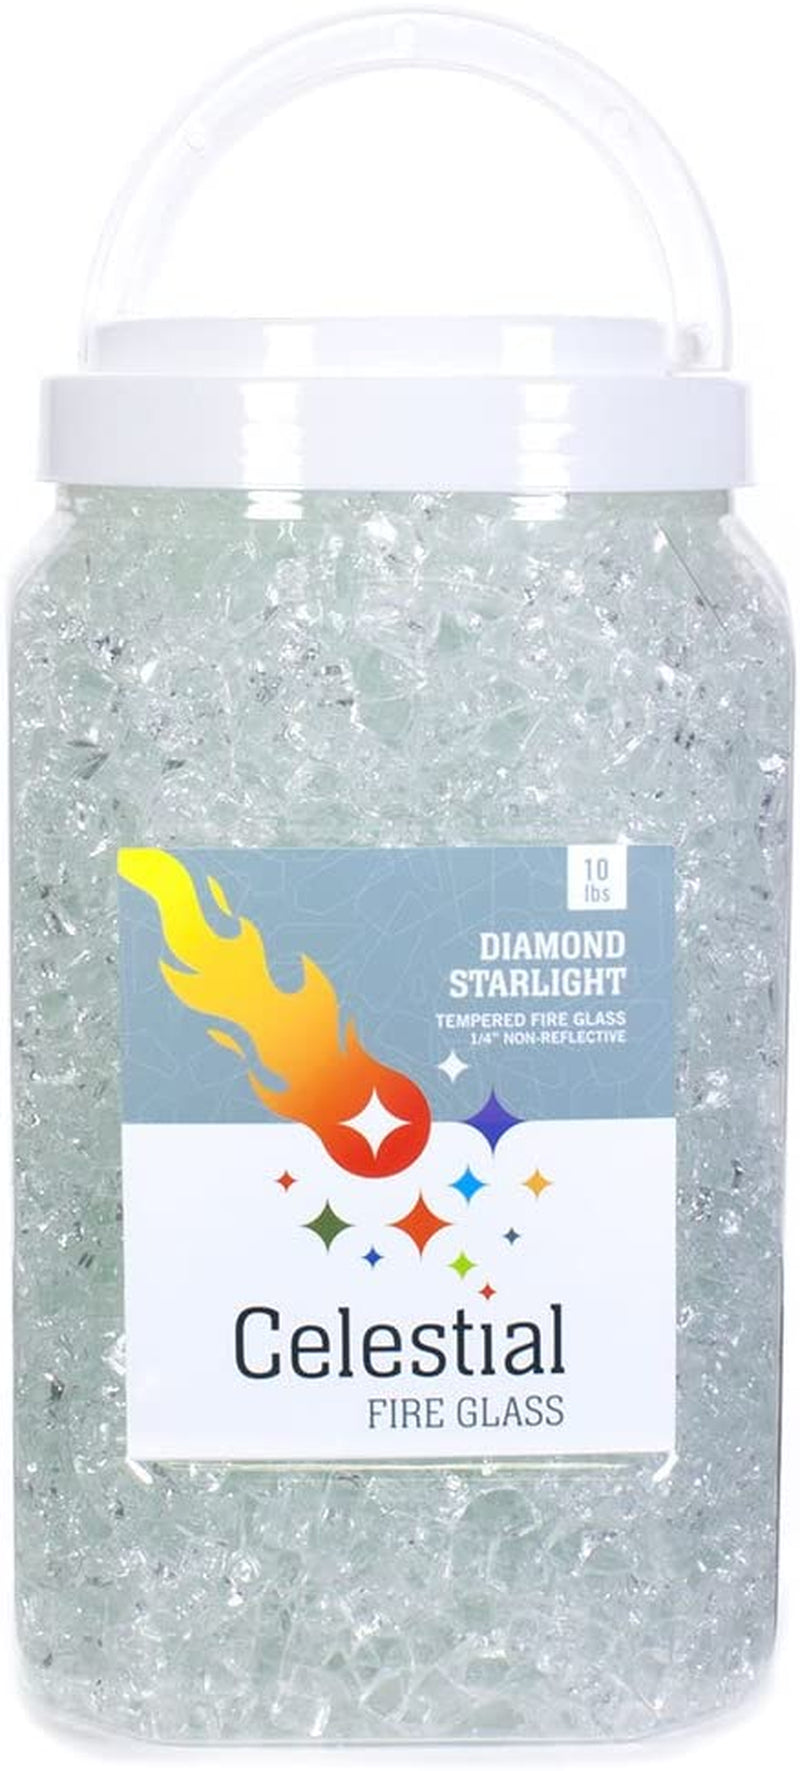 Celestial Fire Glass High Luster, 1/4" Reflective Tempered Fire Glass in Neptune Blue, 10 Pound Jar